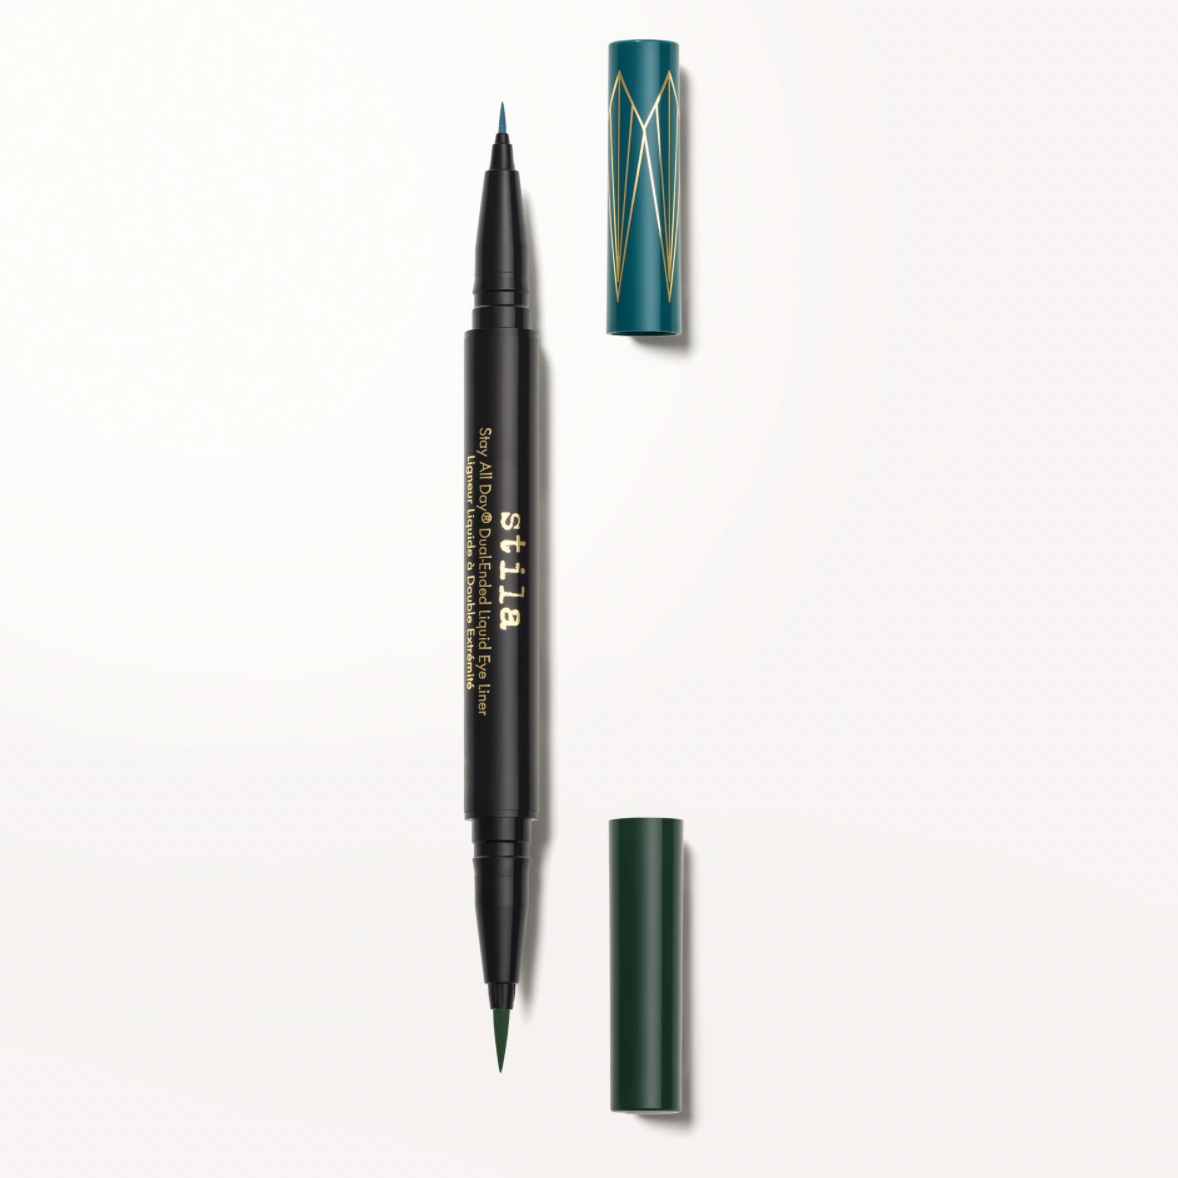 Stay All Day Dual-Ended Liquid Eye Liner: Two Colors